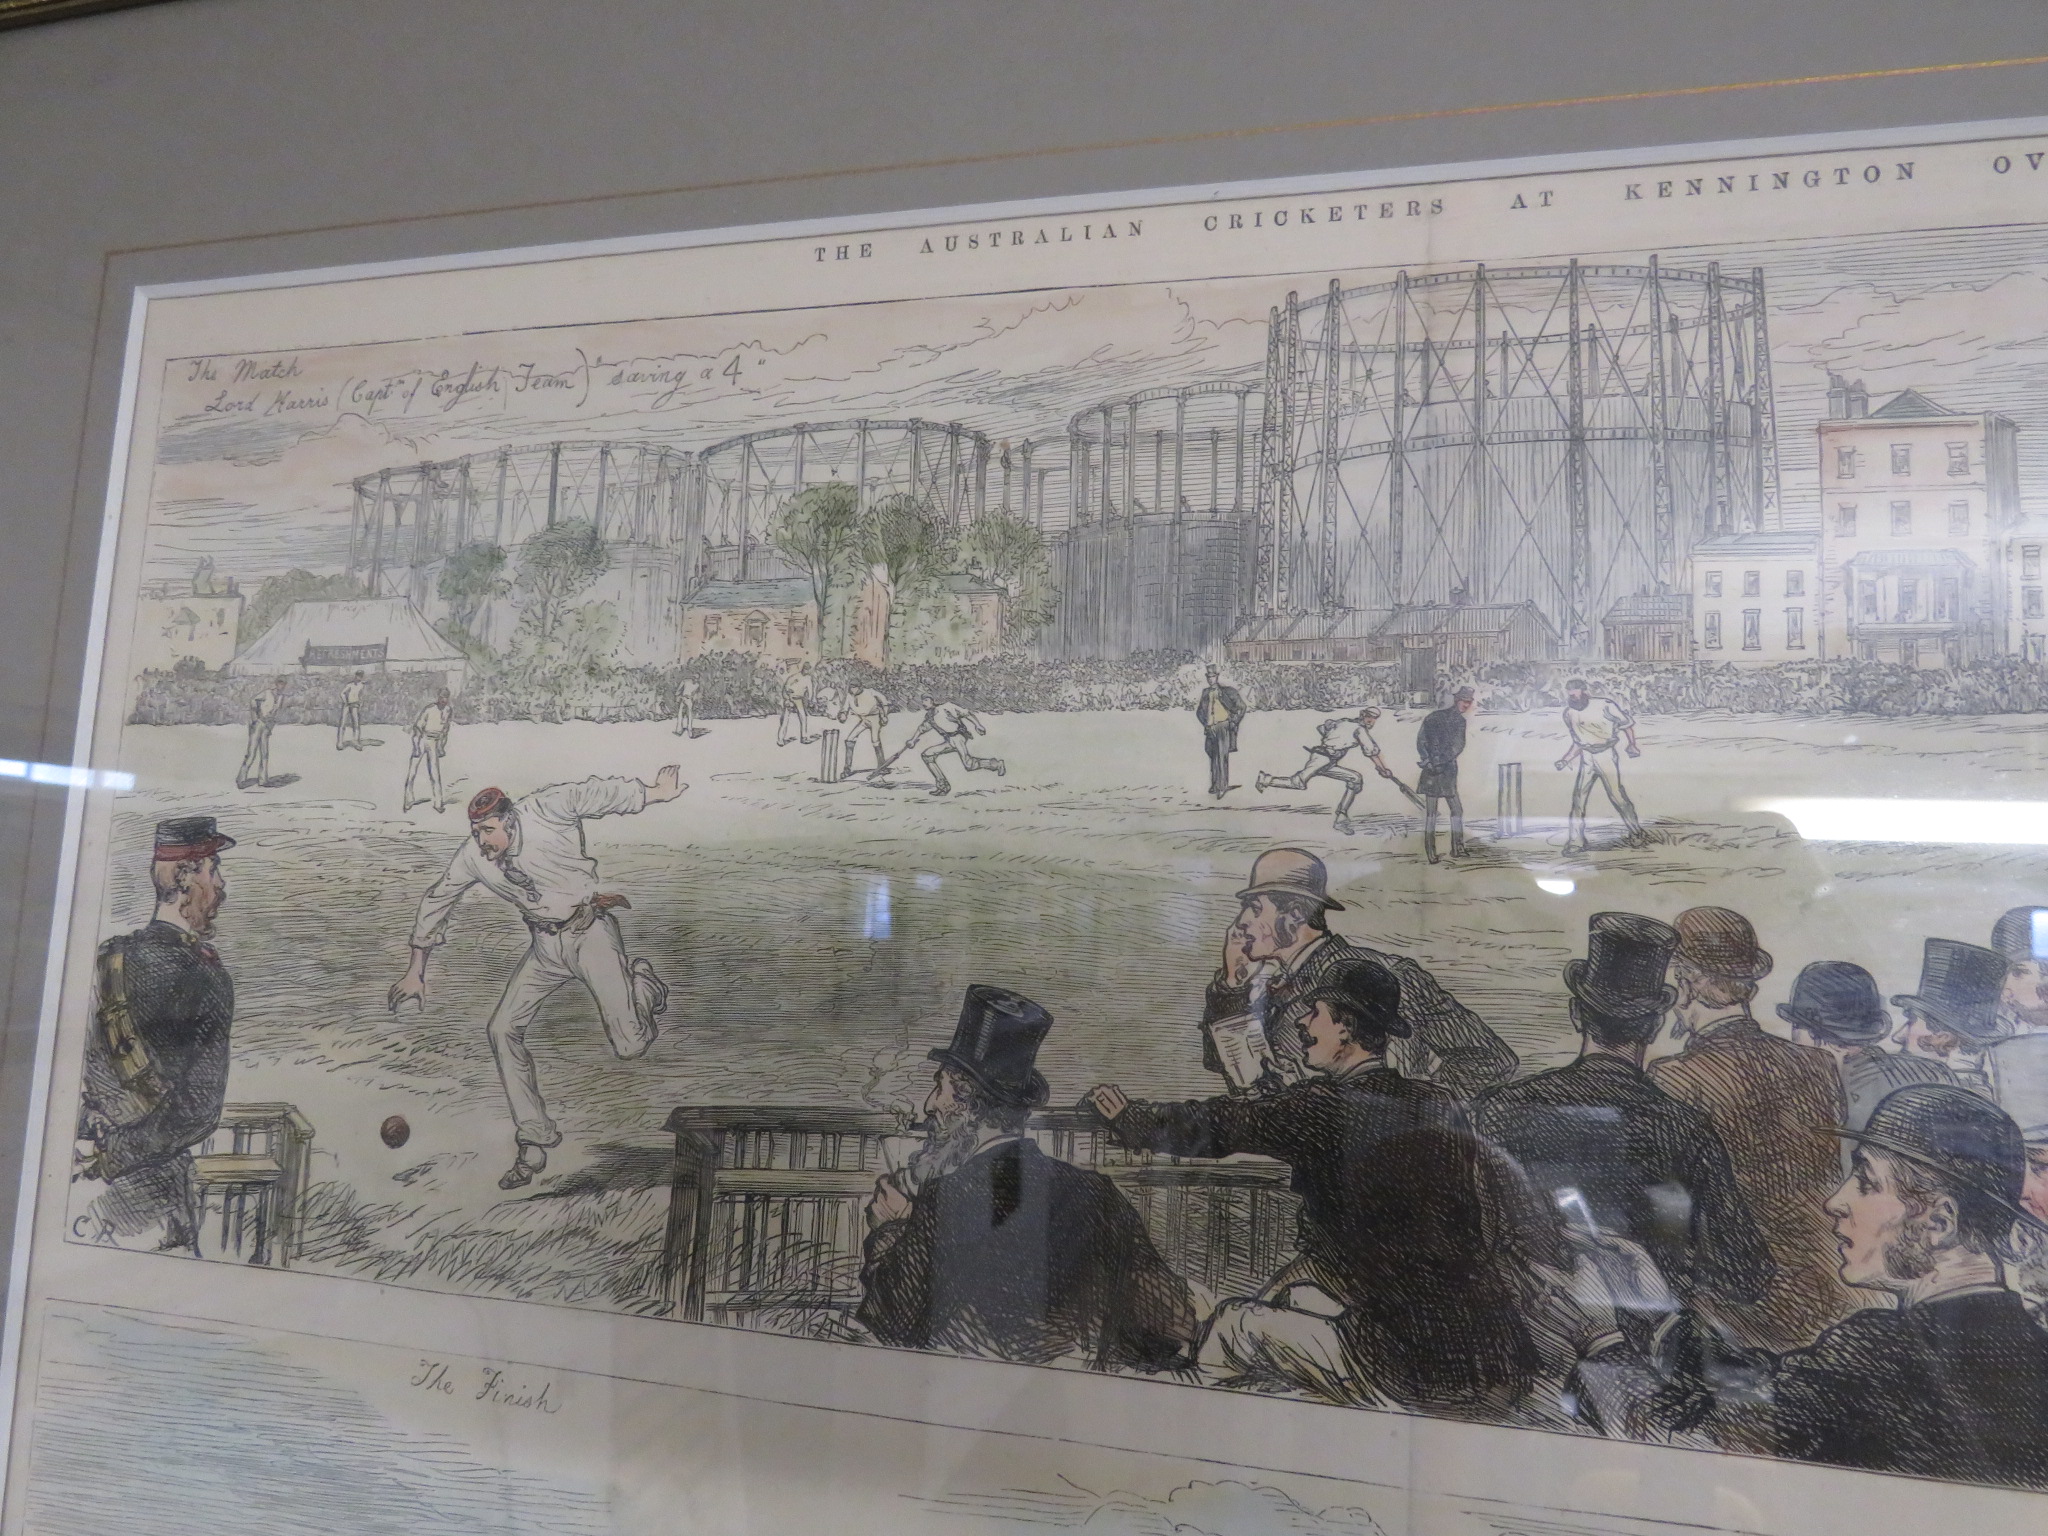 FRAMED AND GLAZED COLOURED ENGRAVING 'THE AUSTRALIAN CRICKETERS AT KENNINGTON OVAL' - Image 2 of 2